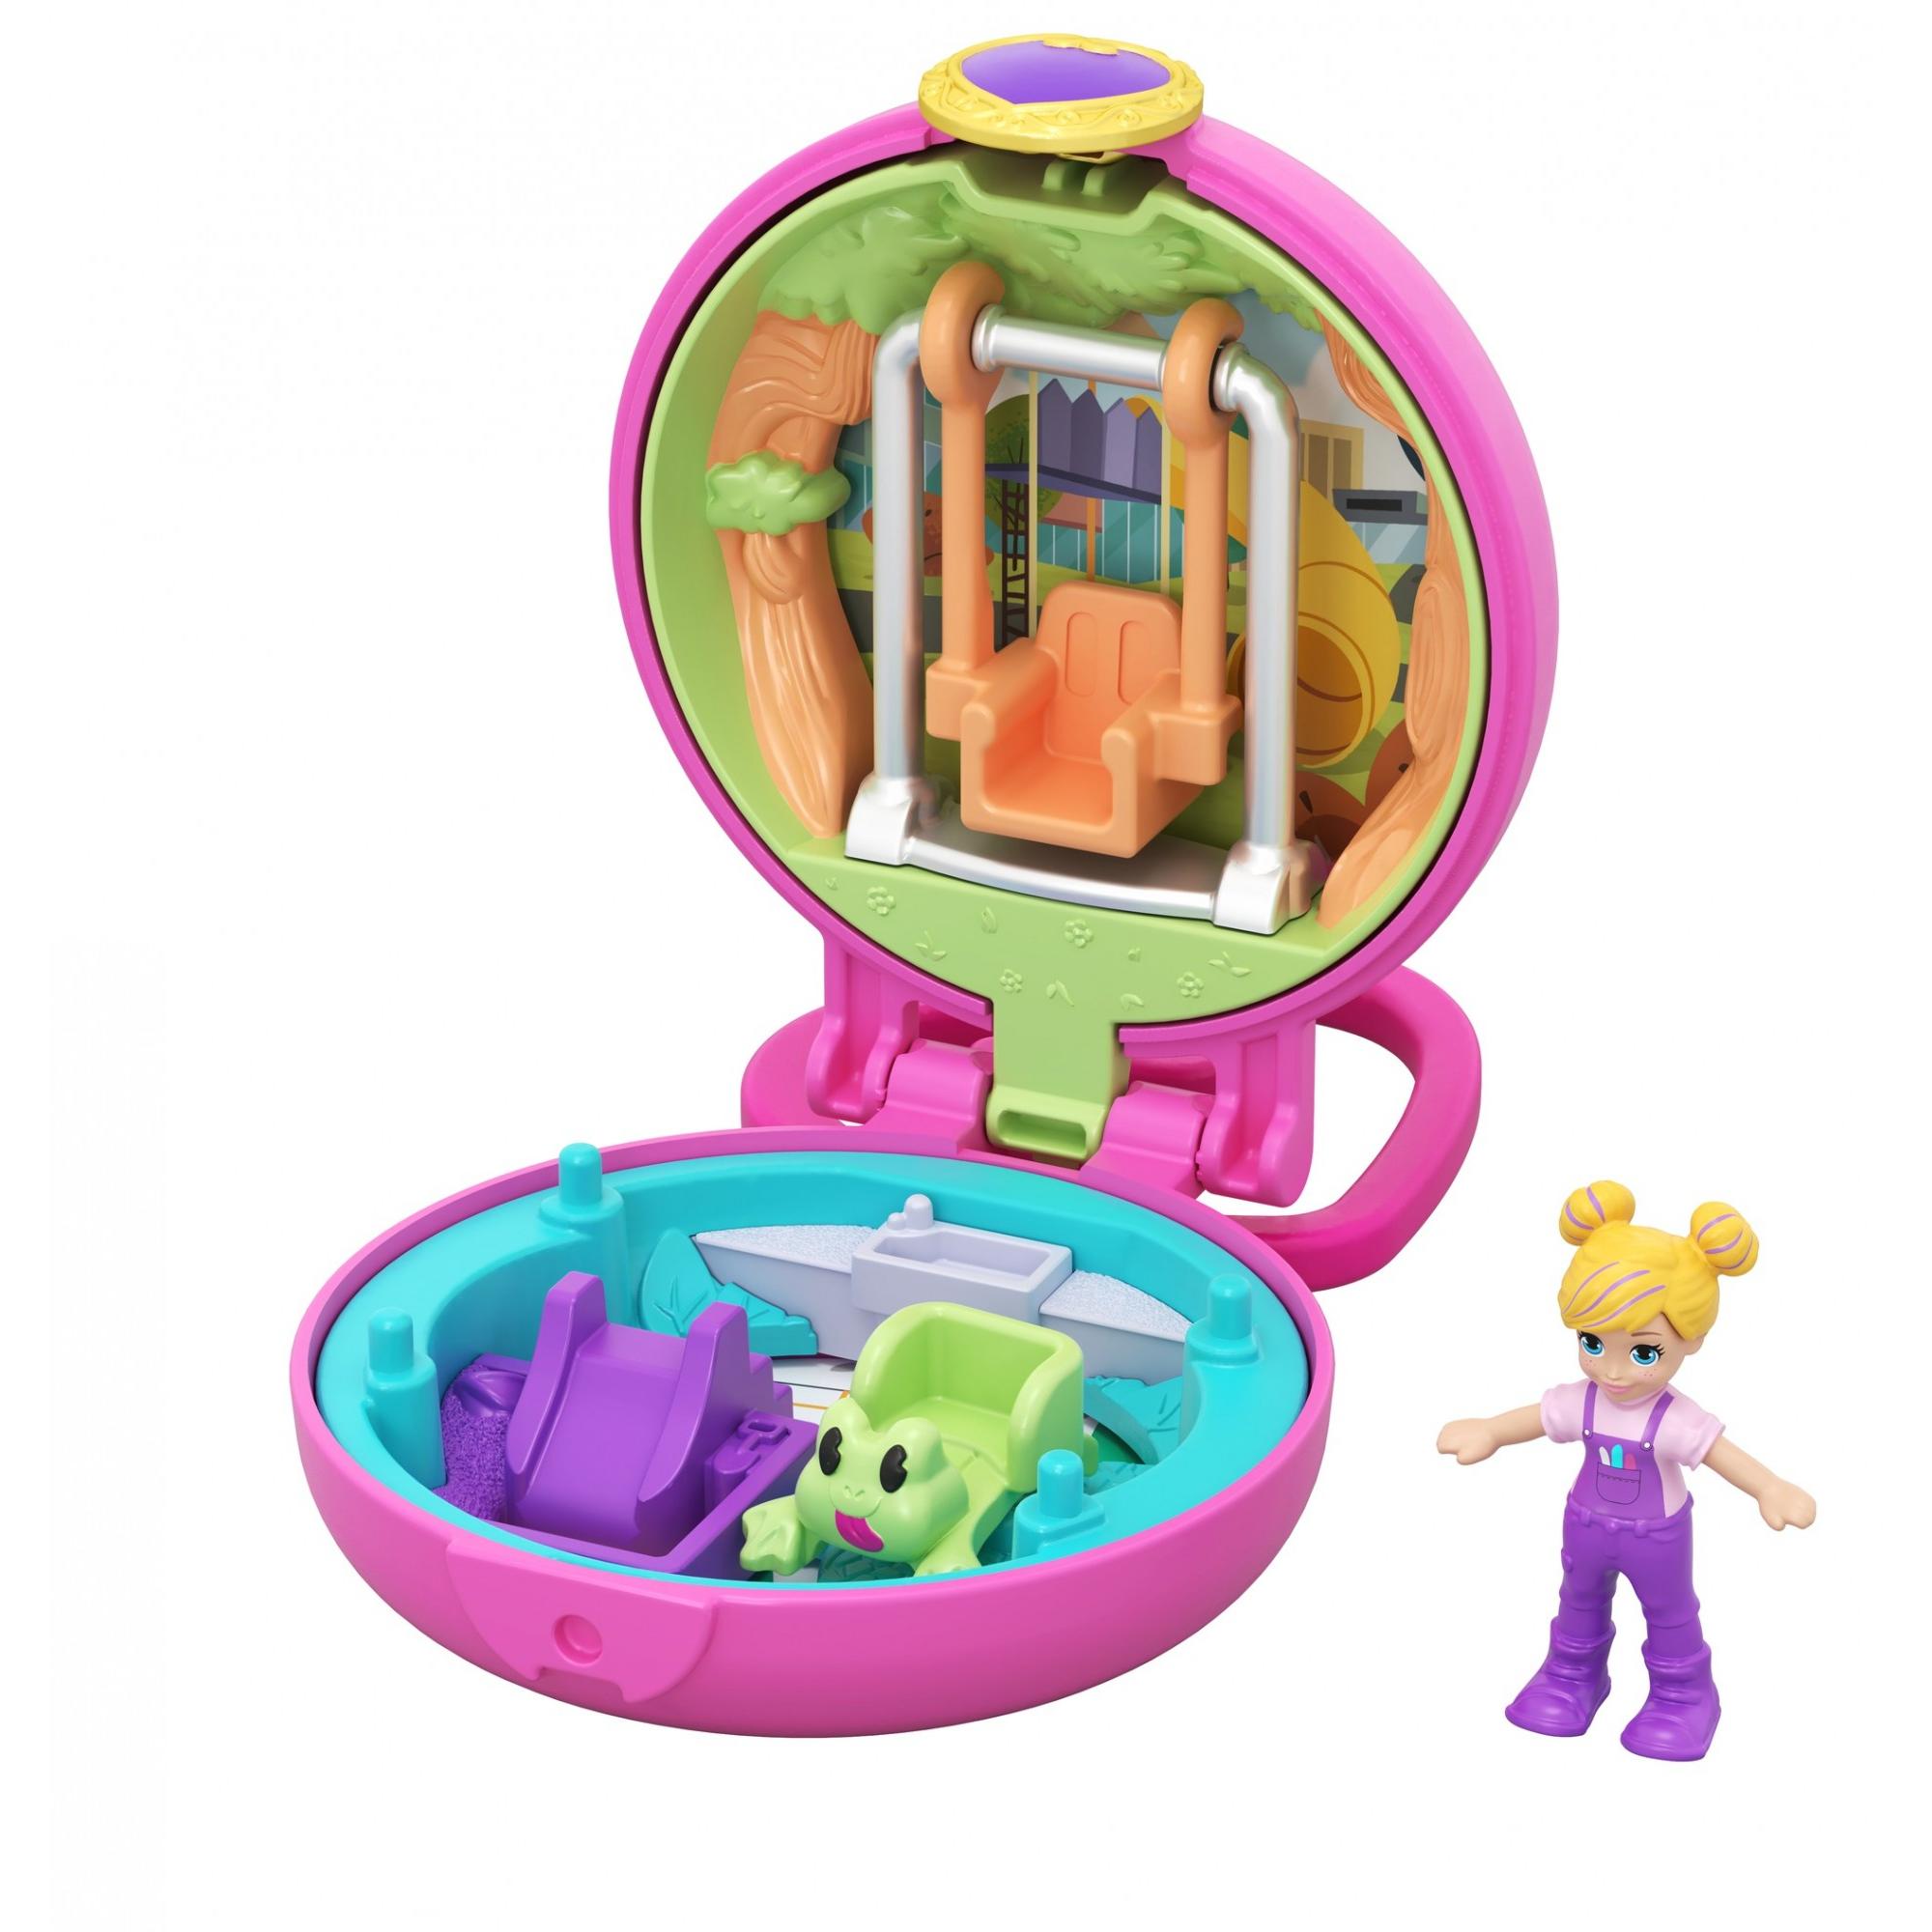 Polly Pocket Tiny Pocket Places Polly Playground Compact - image 1 of 8